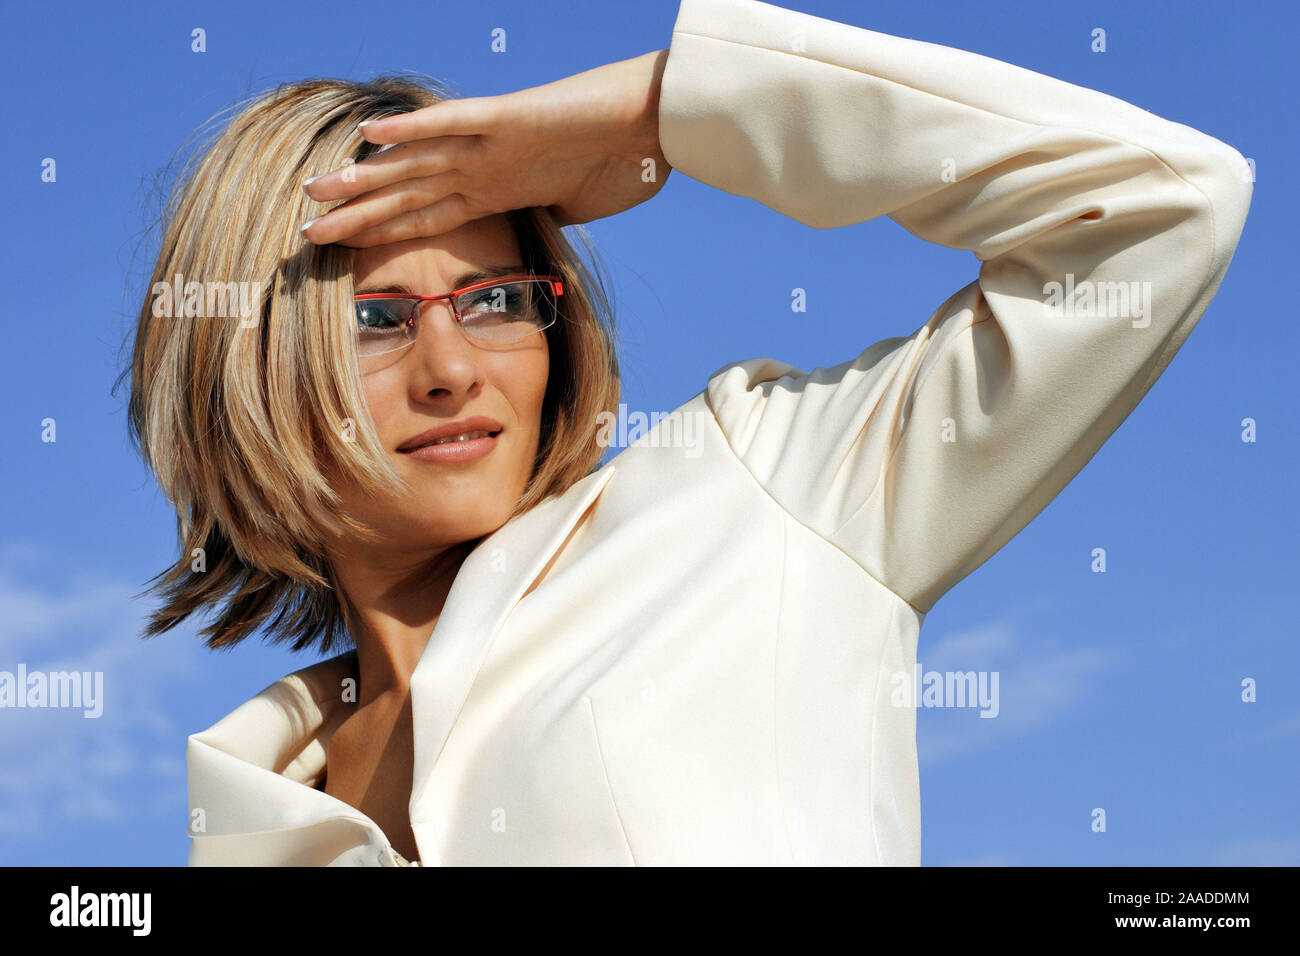 Junge Frau mit Brille | young woman bespectacled Stock Photo